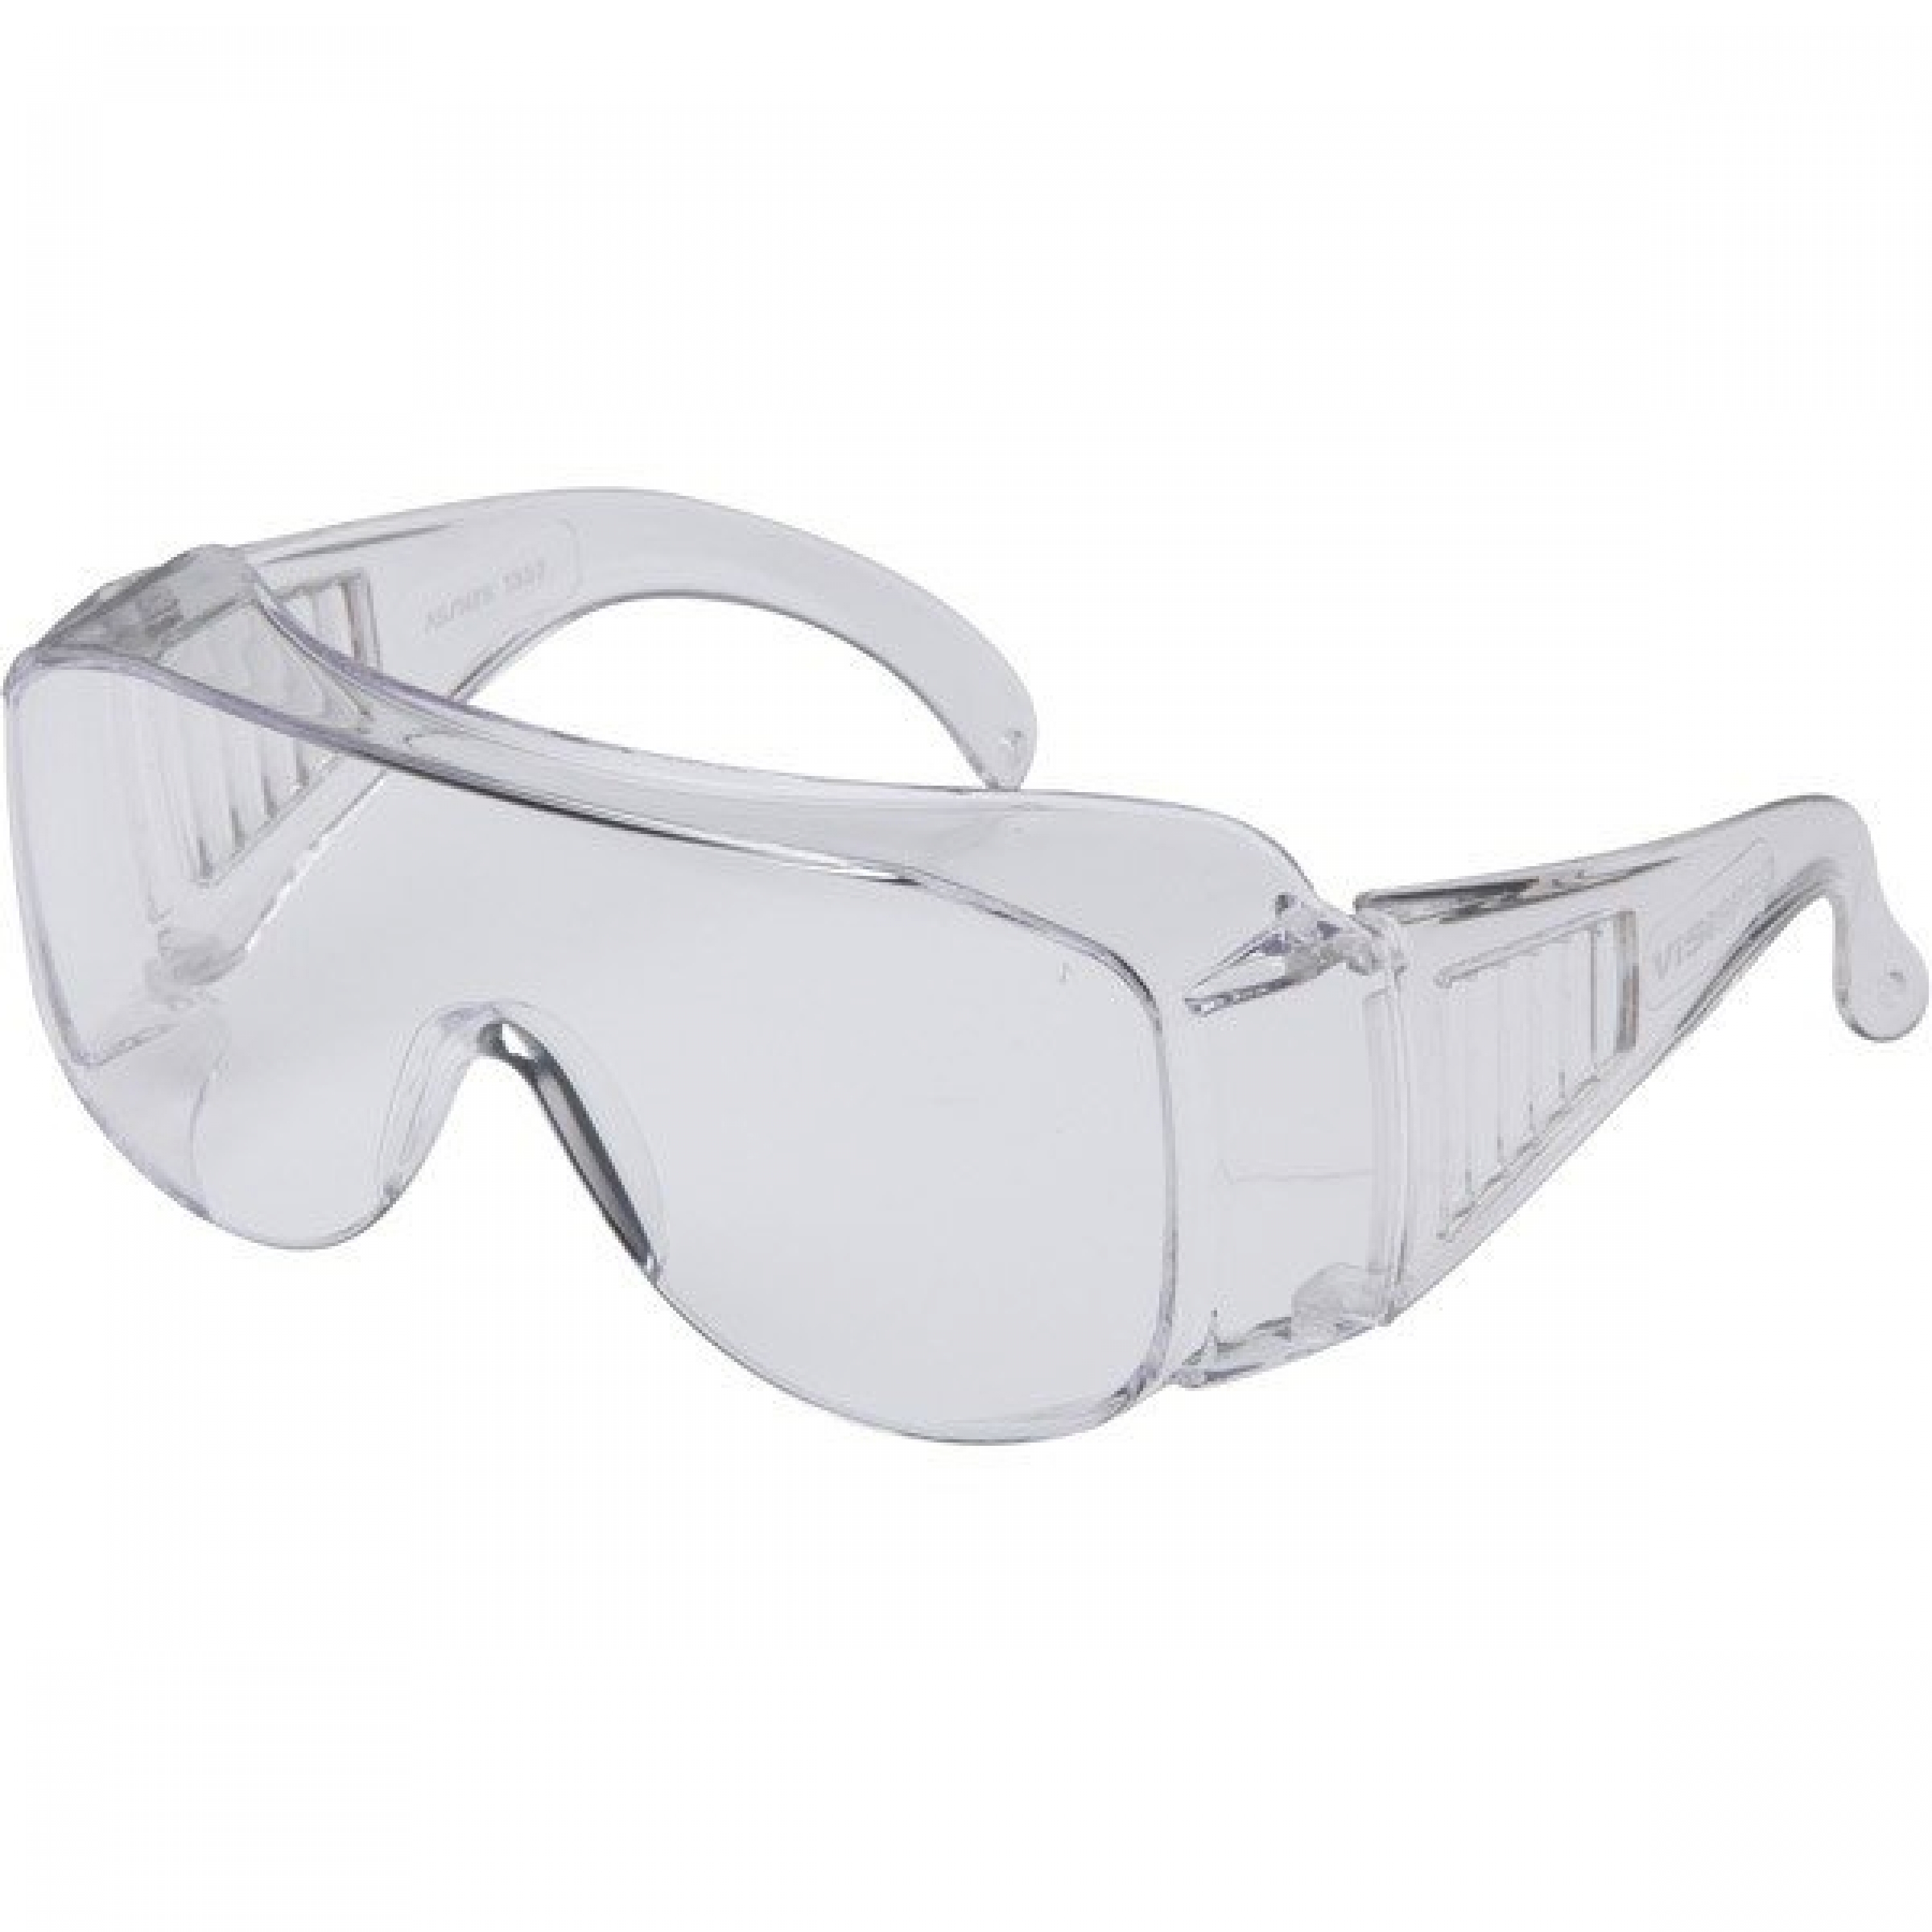 SAFETY OVERSPEC GLASSES CLEAR